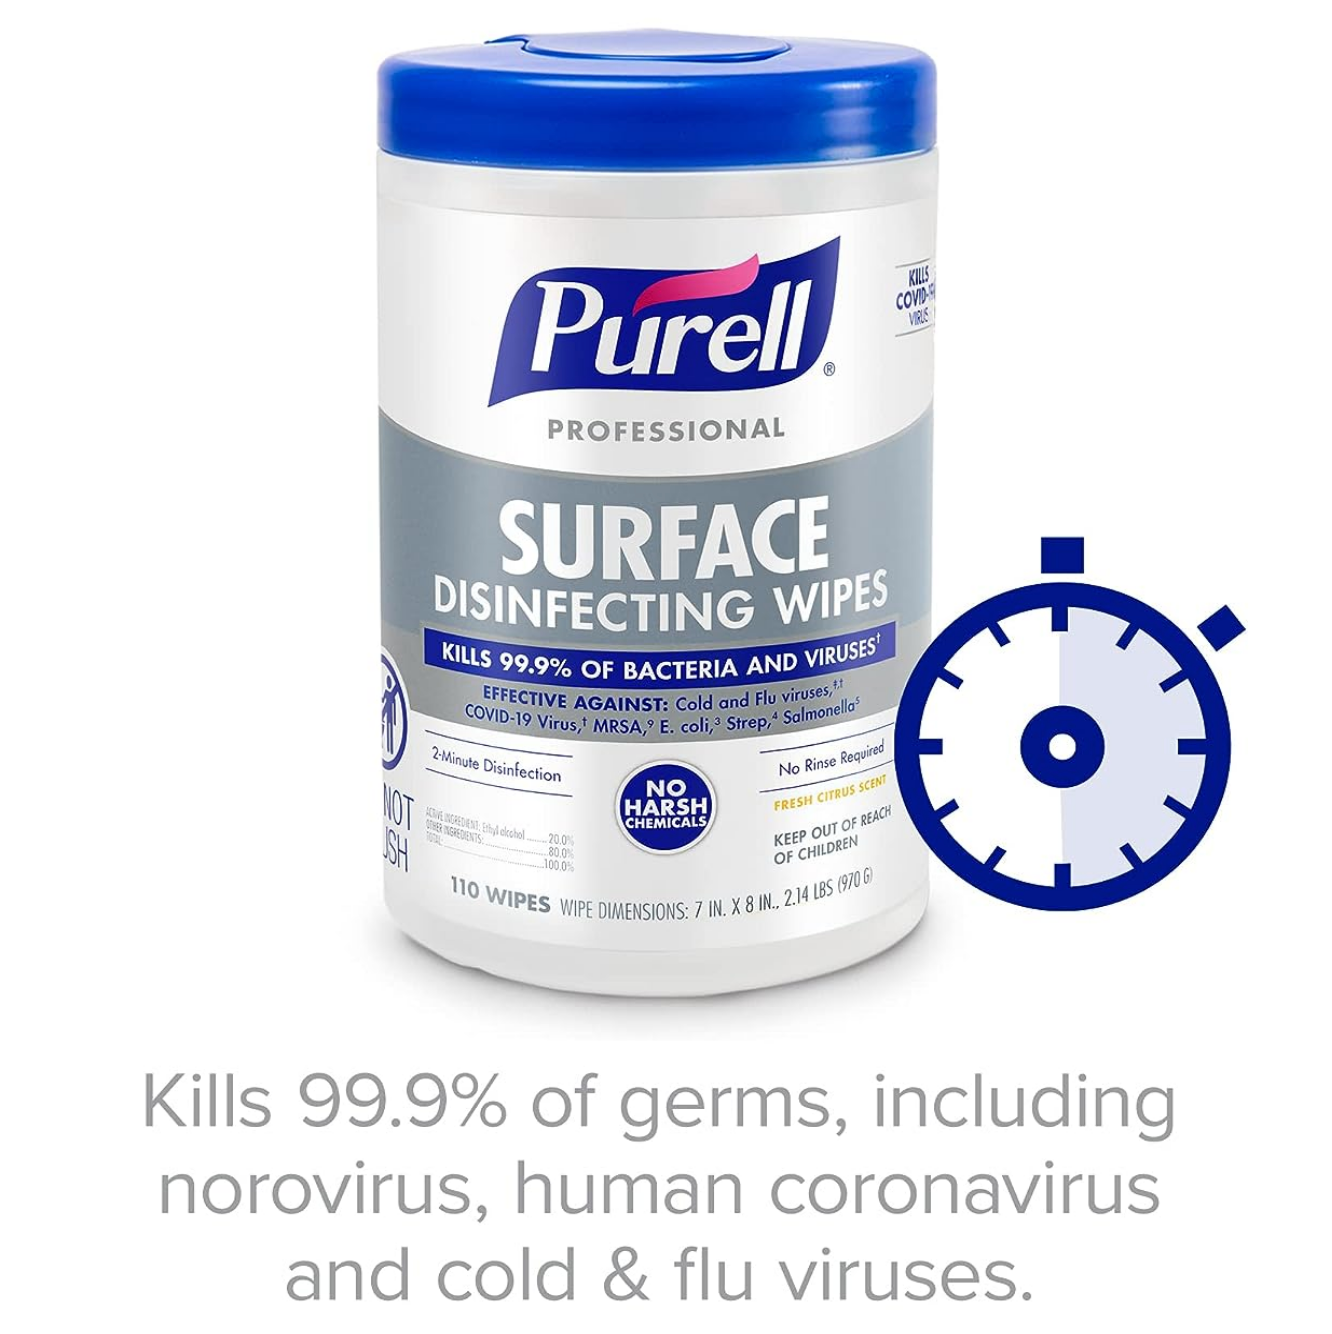 Purell Disinfecting Wipes - $6.50 Each (Case of 6)